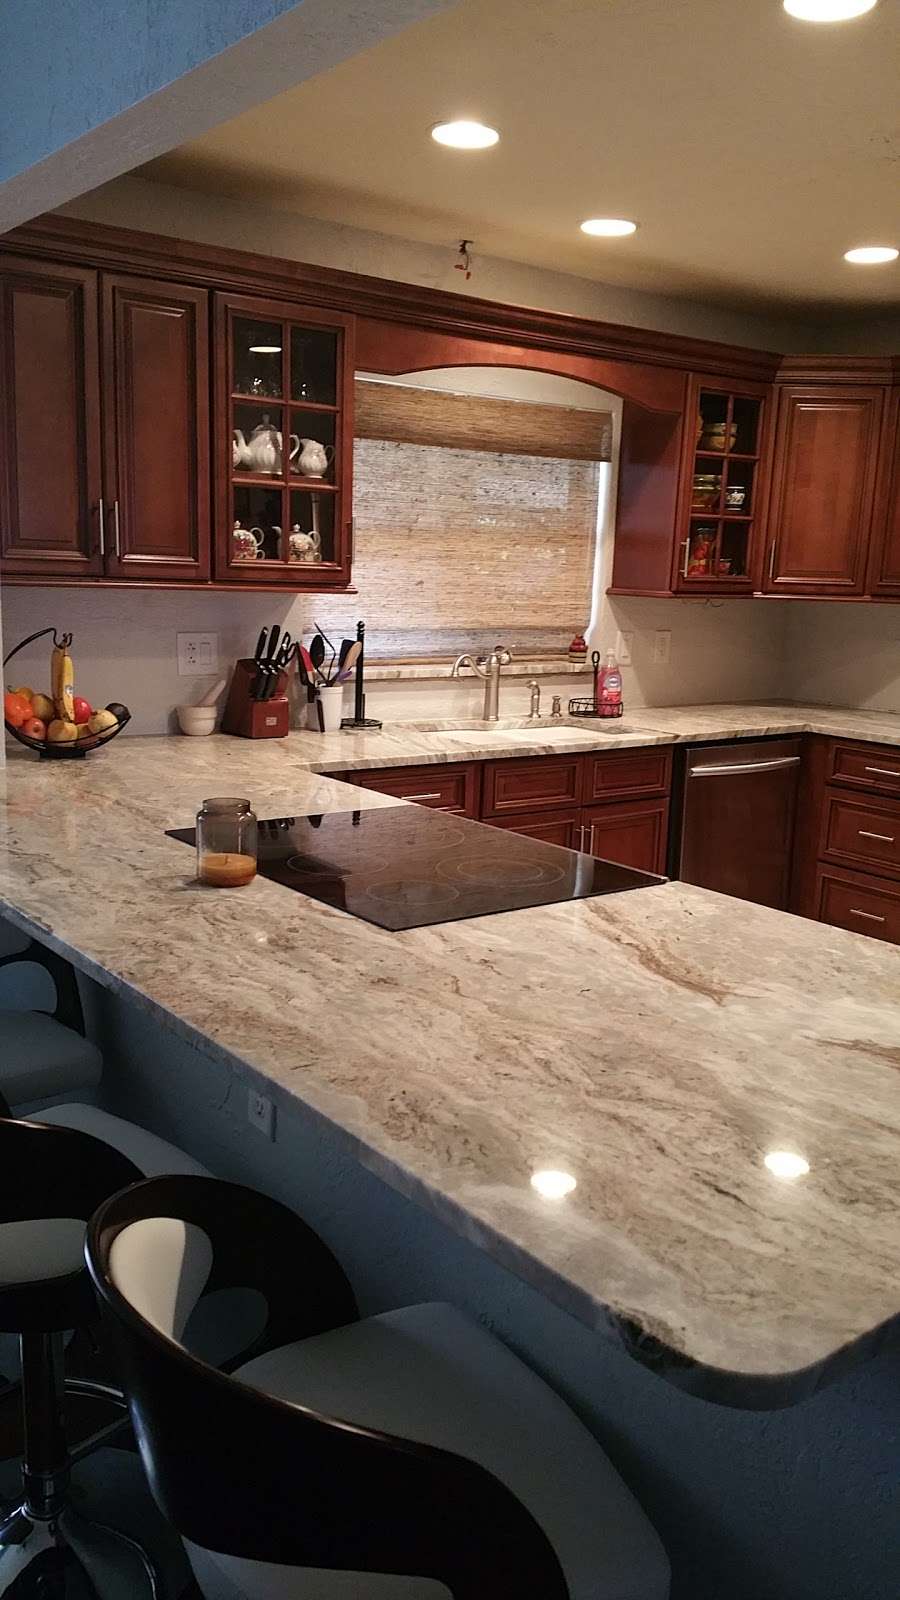 Touch of the Carpenter LLC - Cabinets & Counter Tops | 262 American Spirit Rd #1, Winter Haven, FL 33880 | Phone: (863) 307-1005